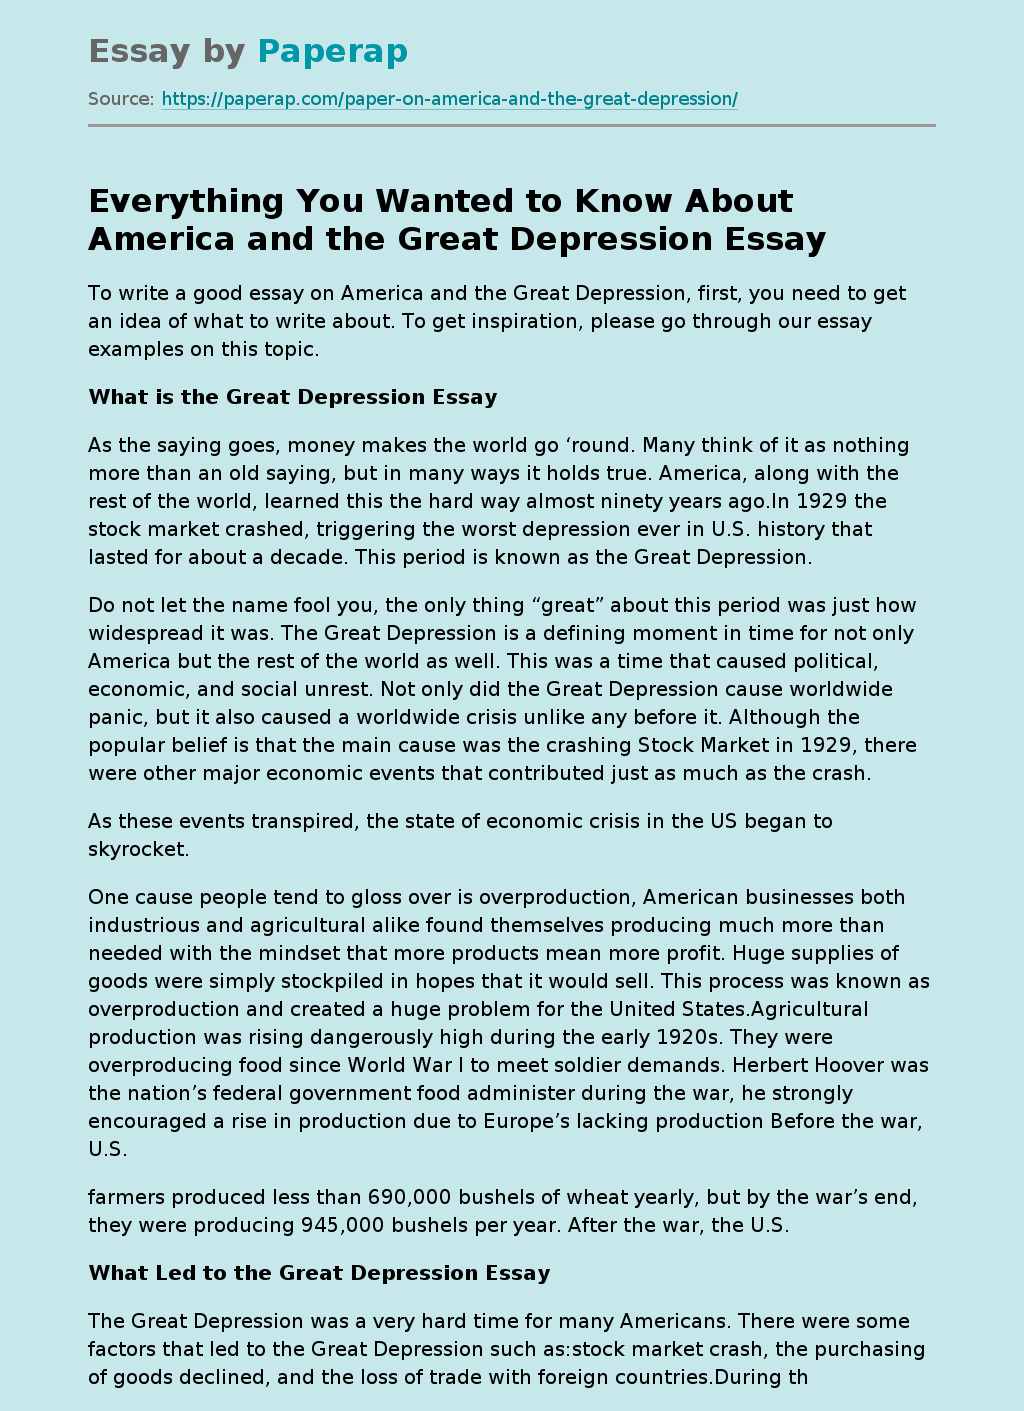 Everything You Wanted to Know About America and the Great Depression